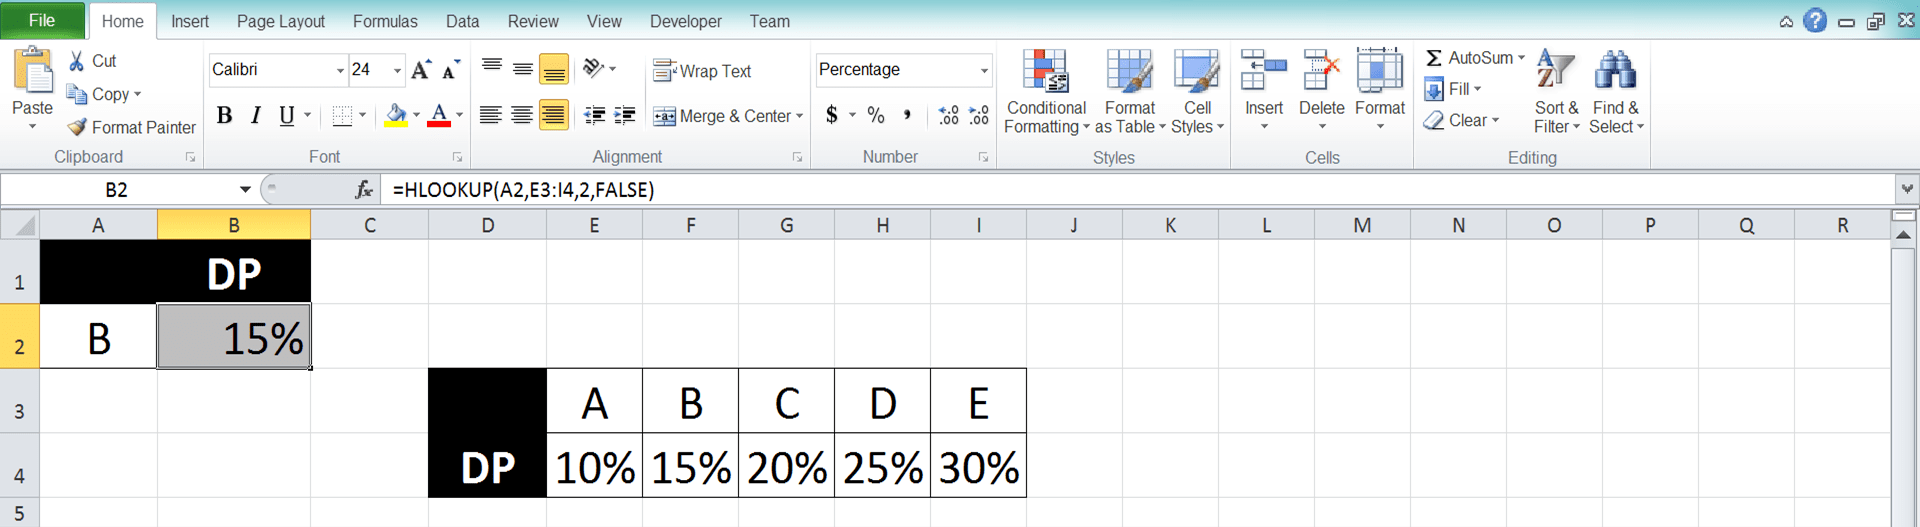 HLOOKUP Formula in Excel: Functions, Examples, and How to Use - Screenshot of Step 9